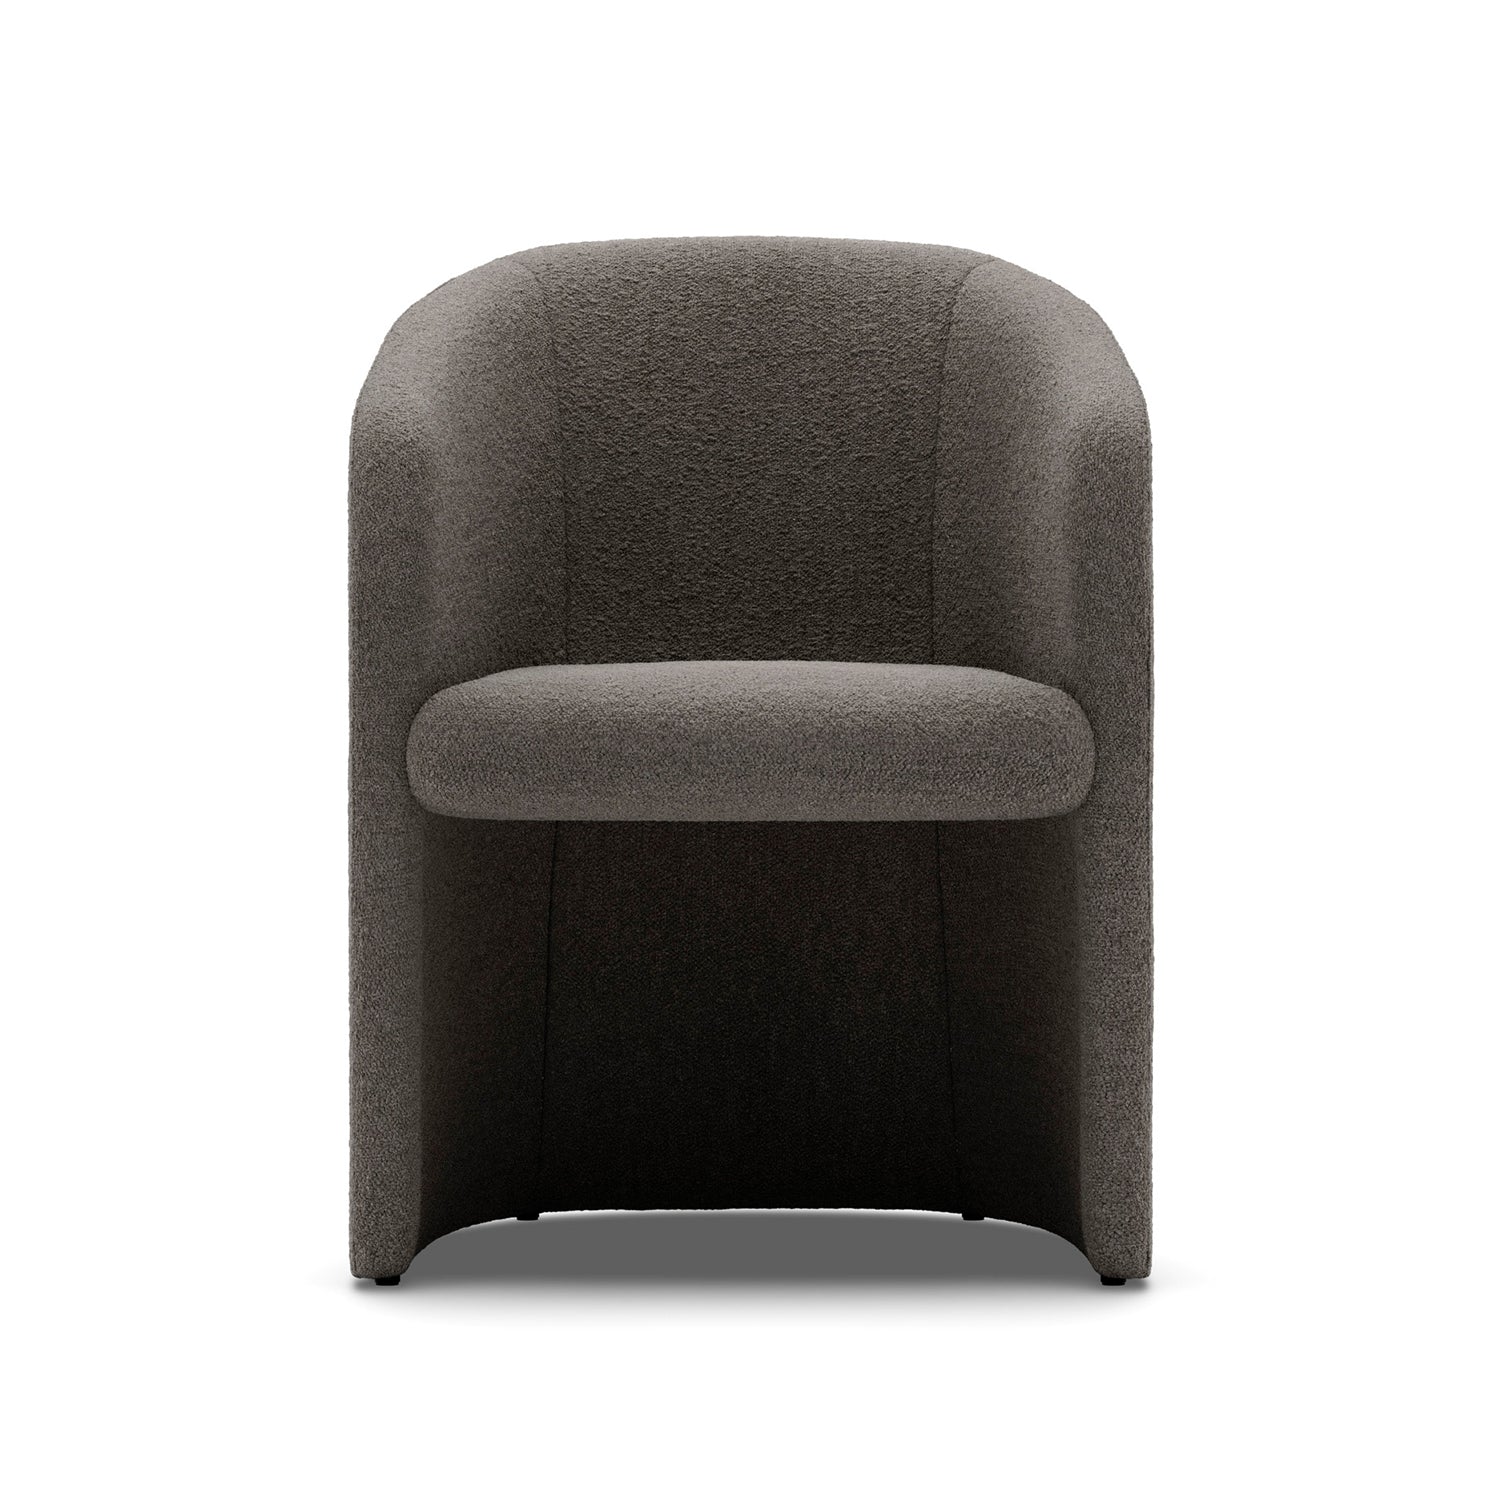 New Works Covent Club Chair in dark taupe